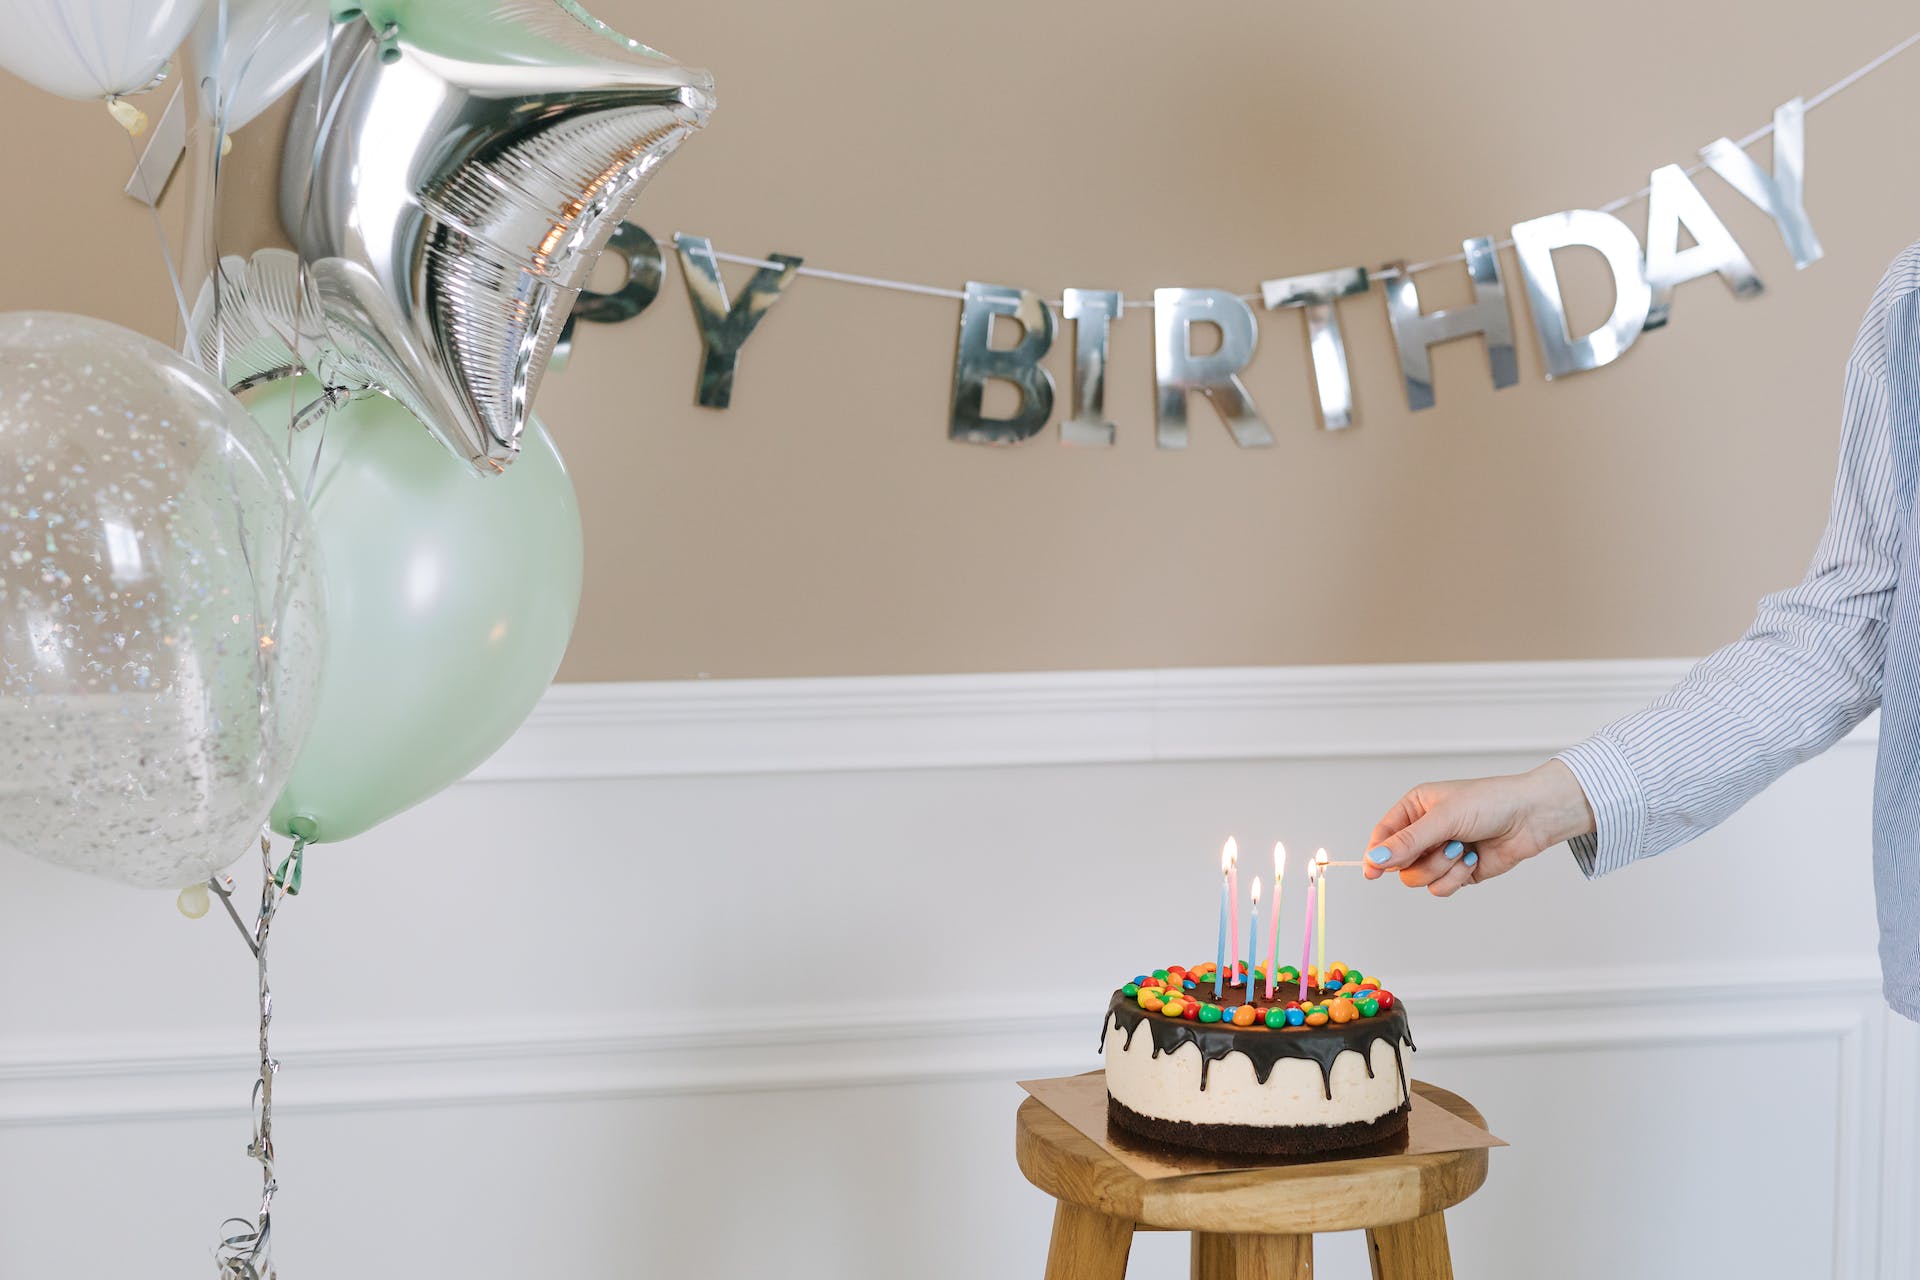 A person lighting a candle on a birthday cake | Source: Pexels